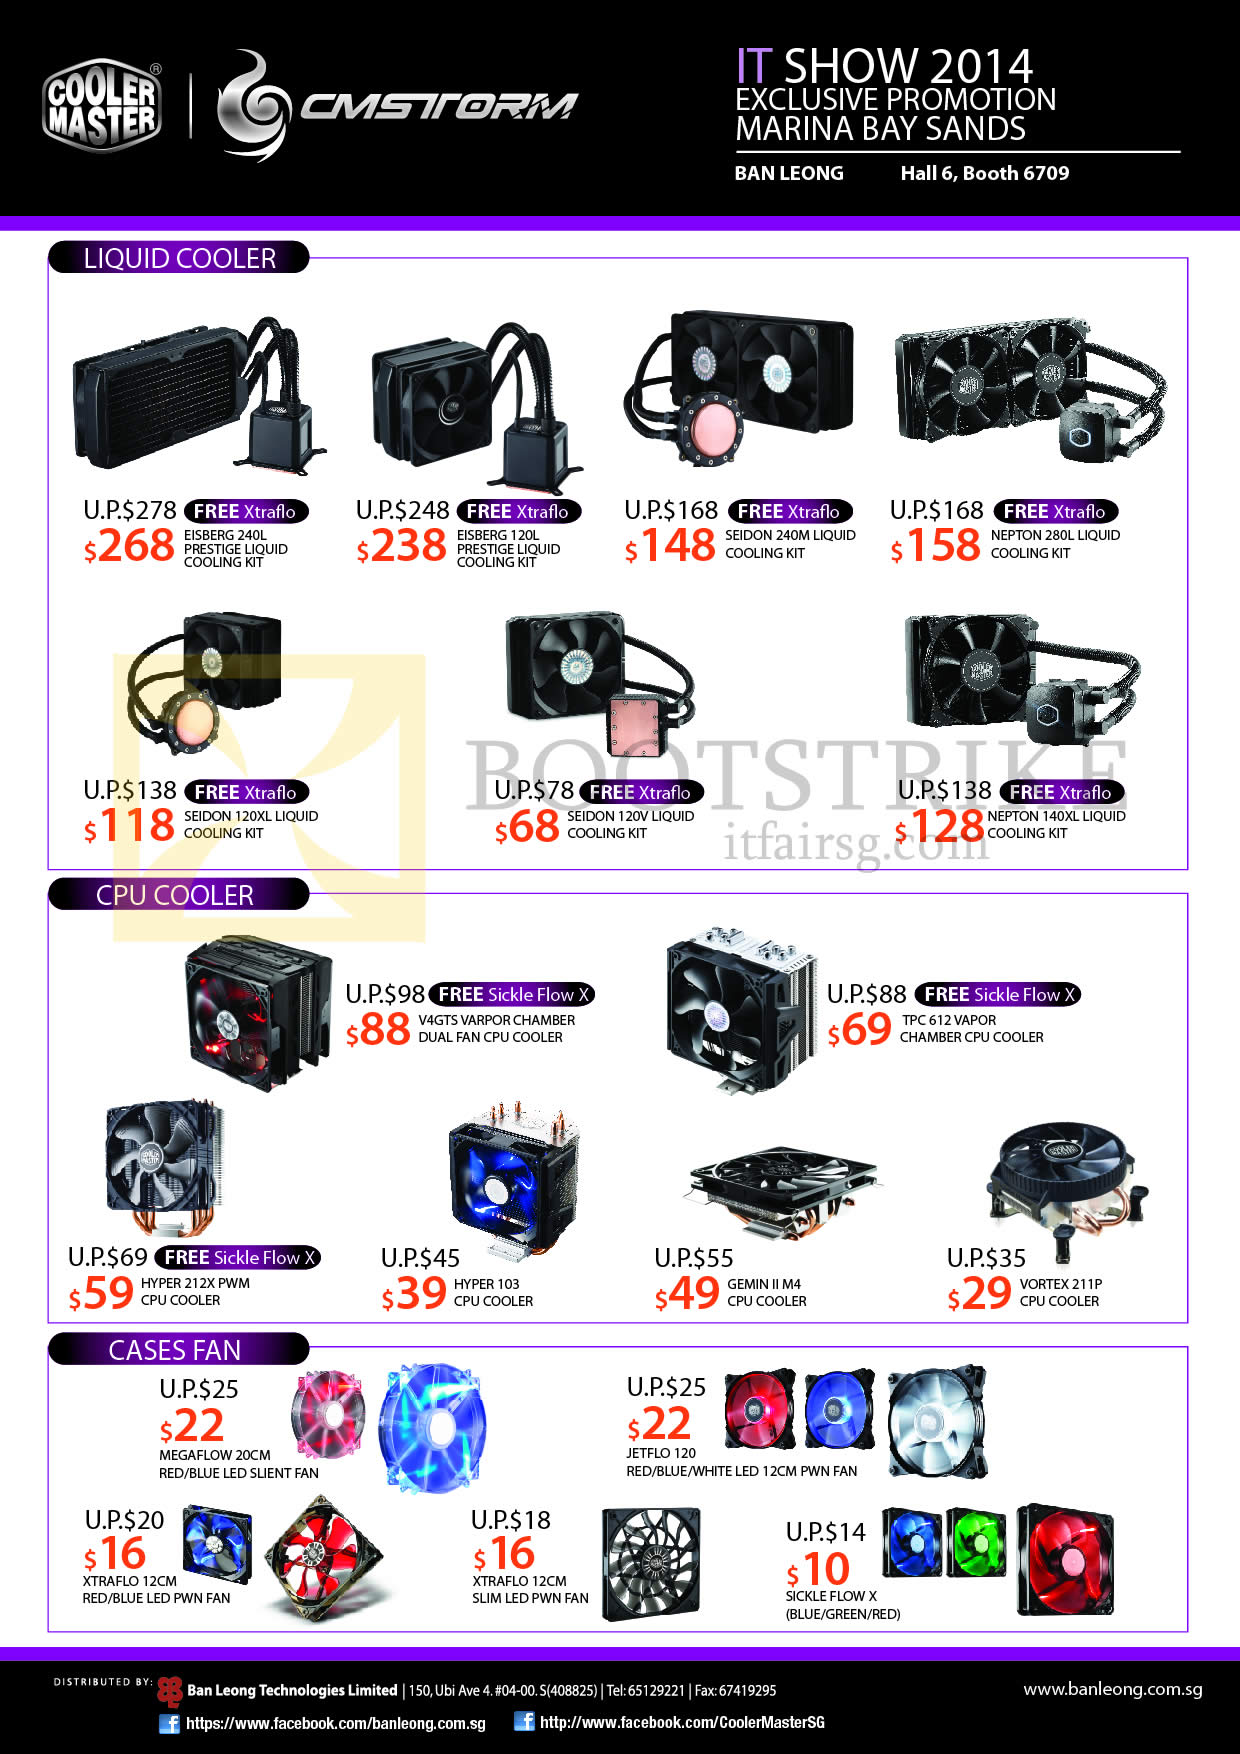 IT SHOW 2014 price list image brochure of Cooler Master Liquid Cooling Systems, CPU Cooler Fans, Case Fans